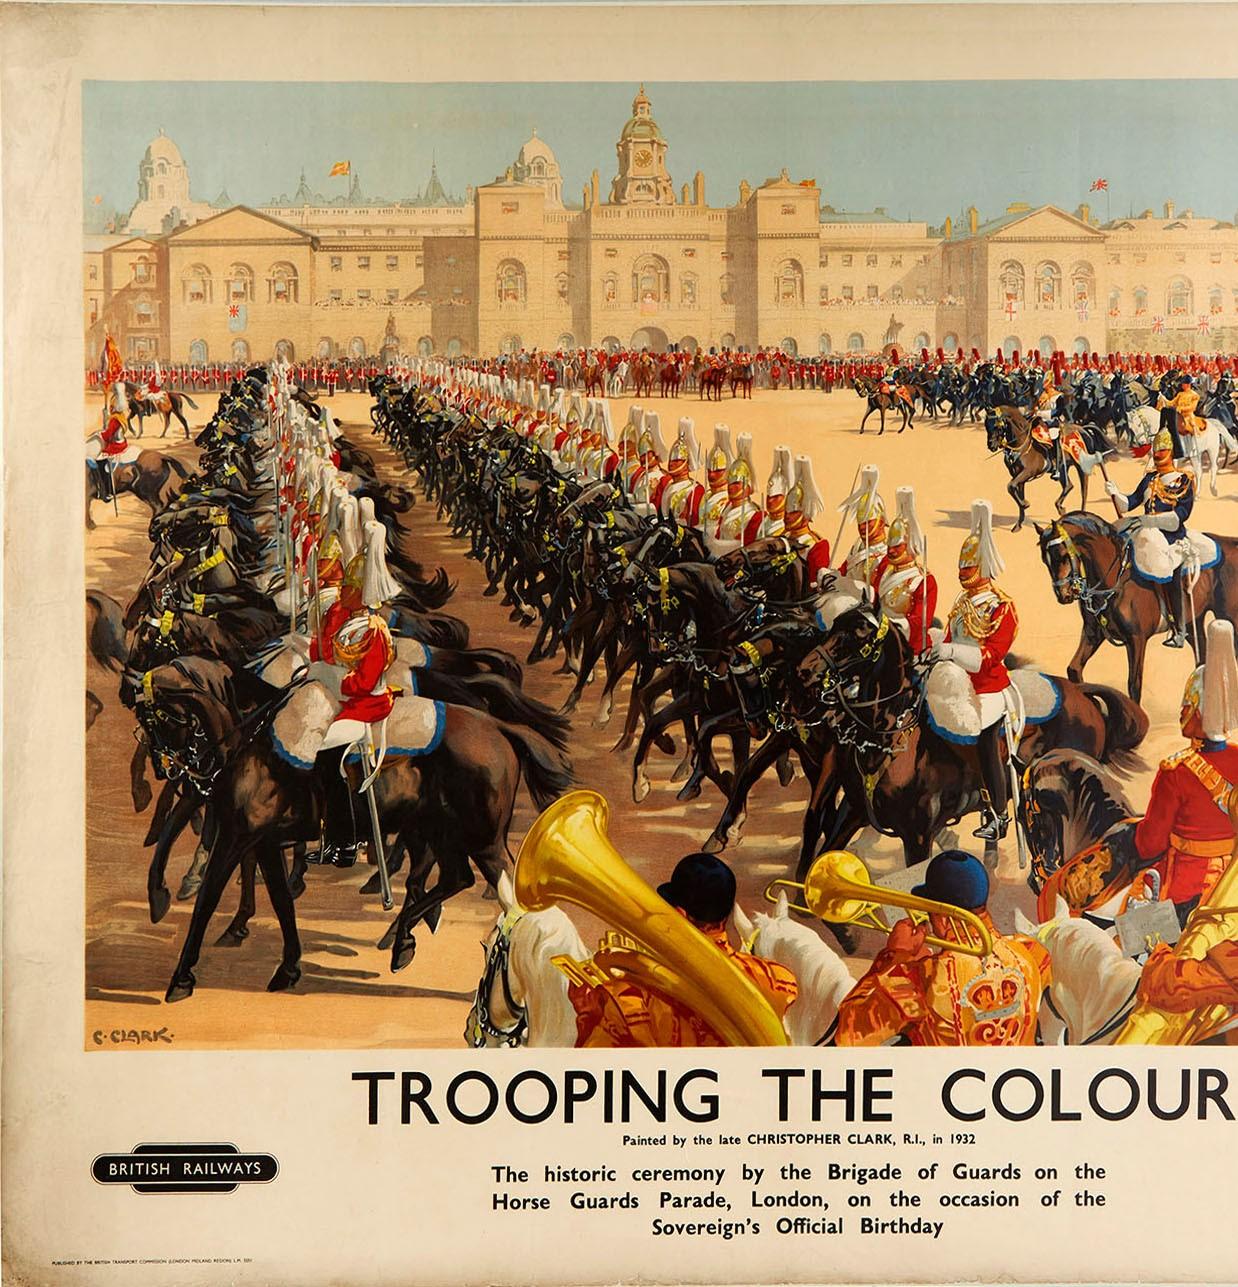 Original vintage British Railways poster featuring Trooping The Colour painted by the late Christopher Clark RI in 1932 - The historic ceremony by the Brigade of Guards on the Horse Guards Parade in London on the occasion of the Sovereign's Official